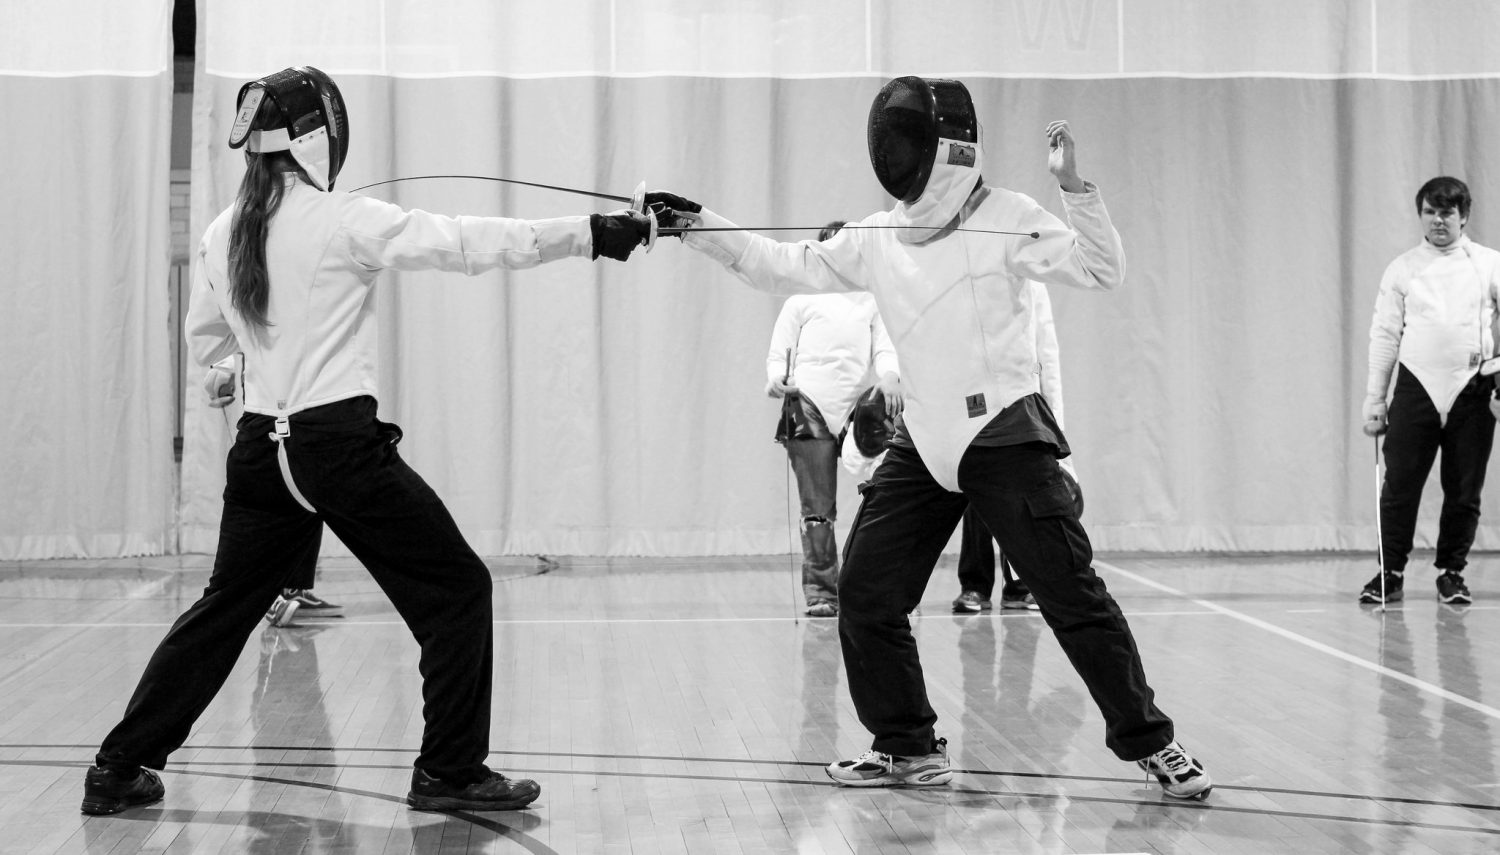 Fencing club welcomes students